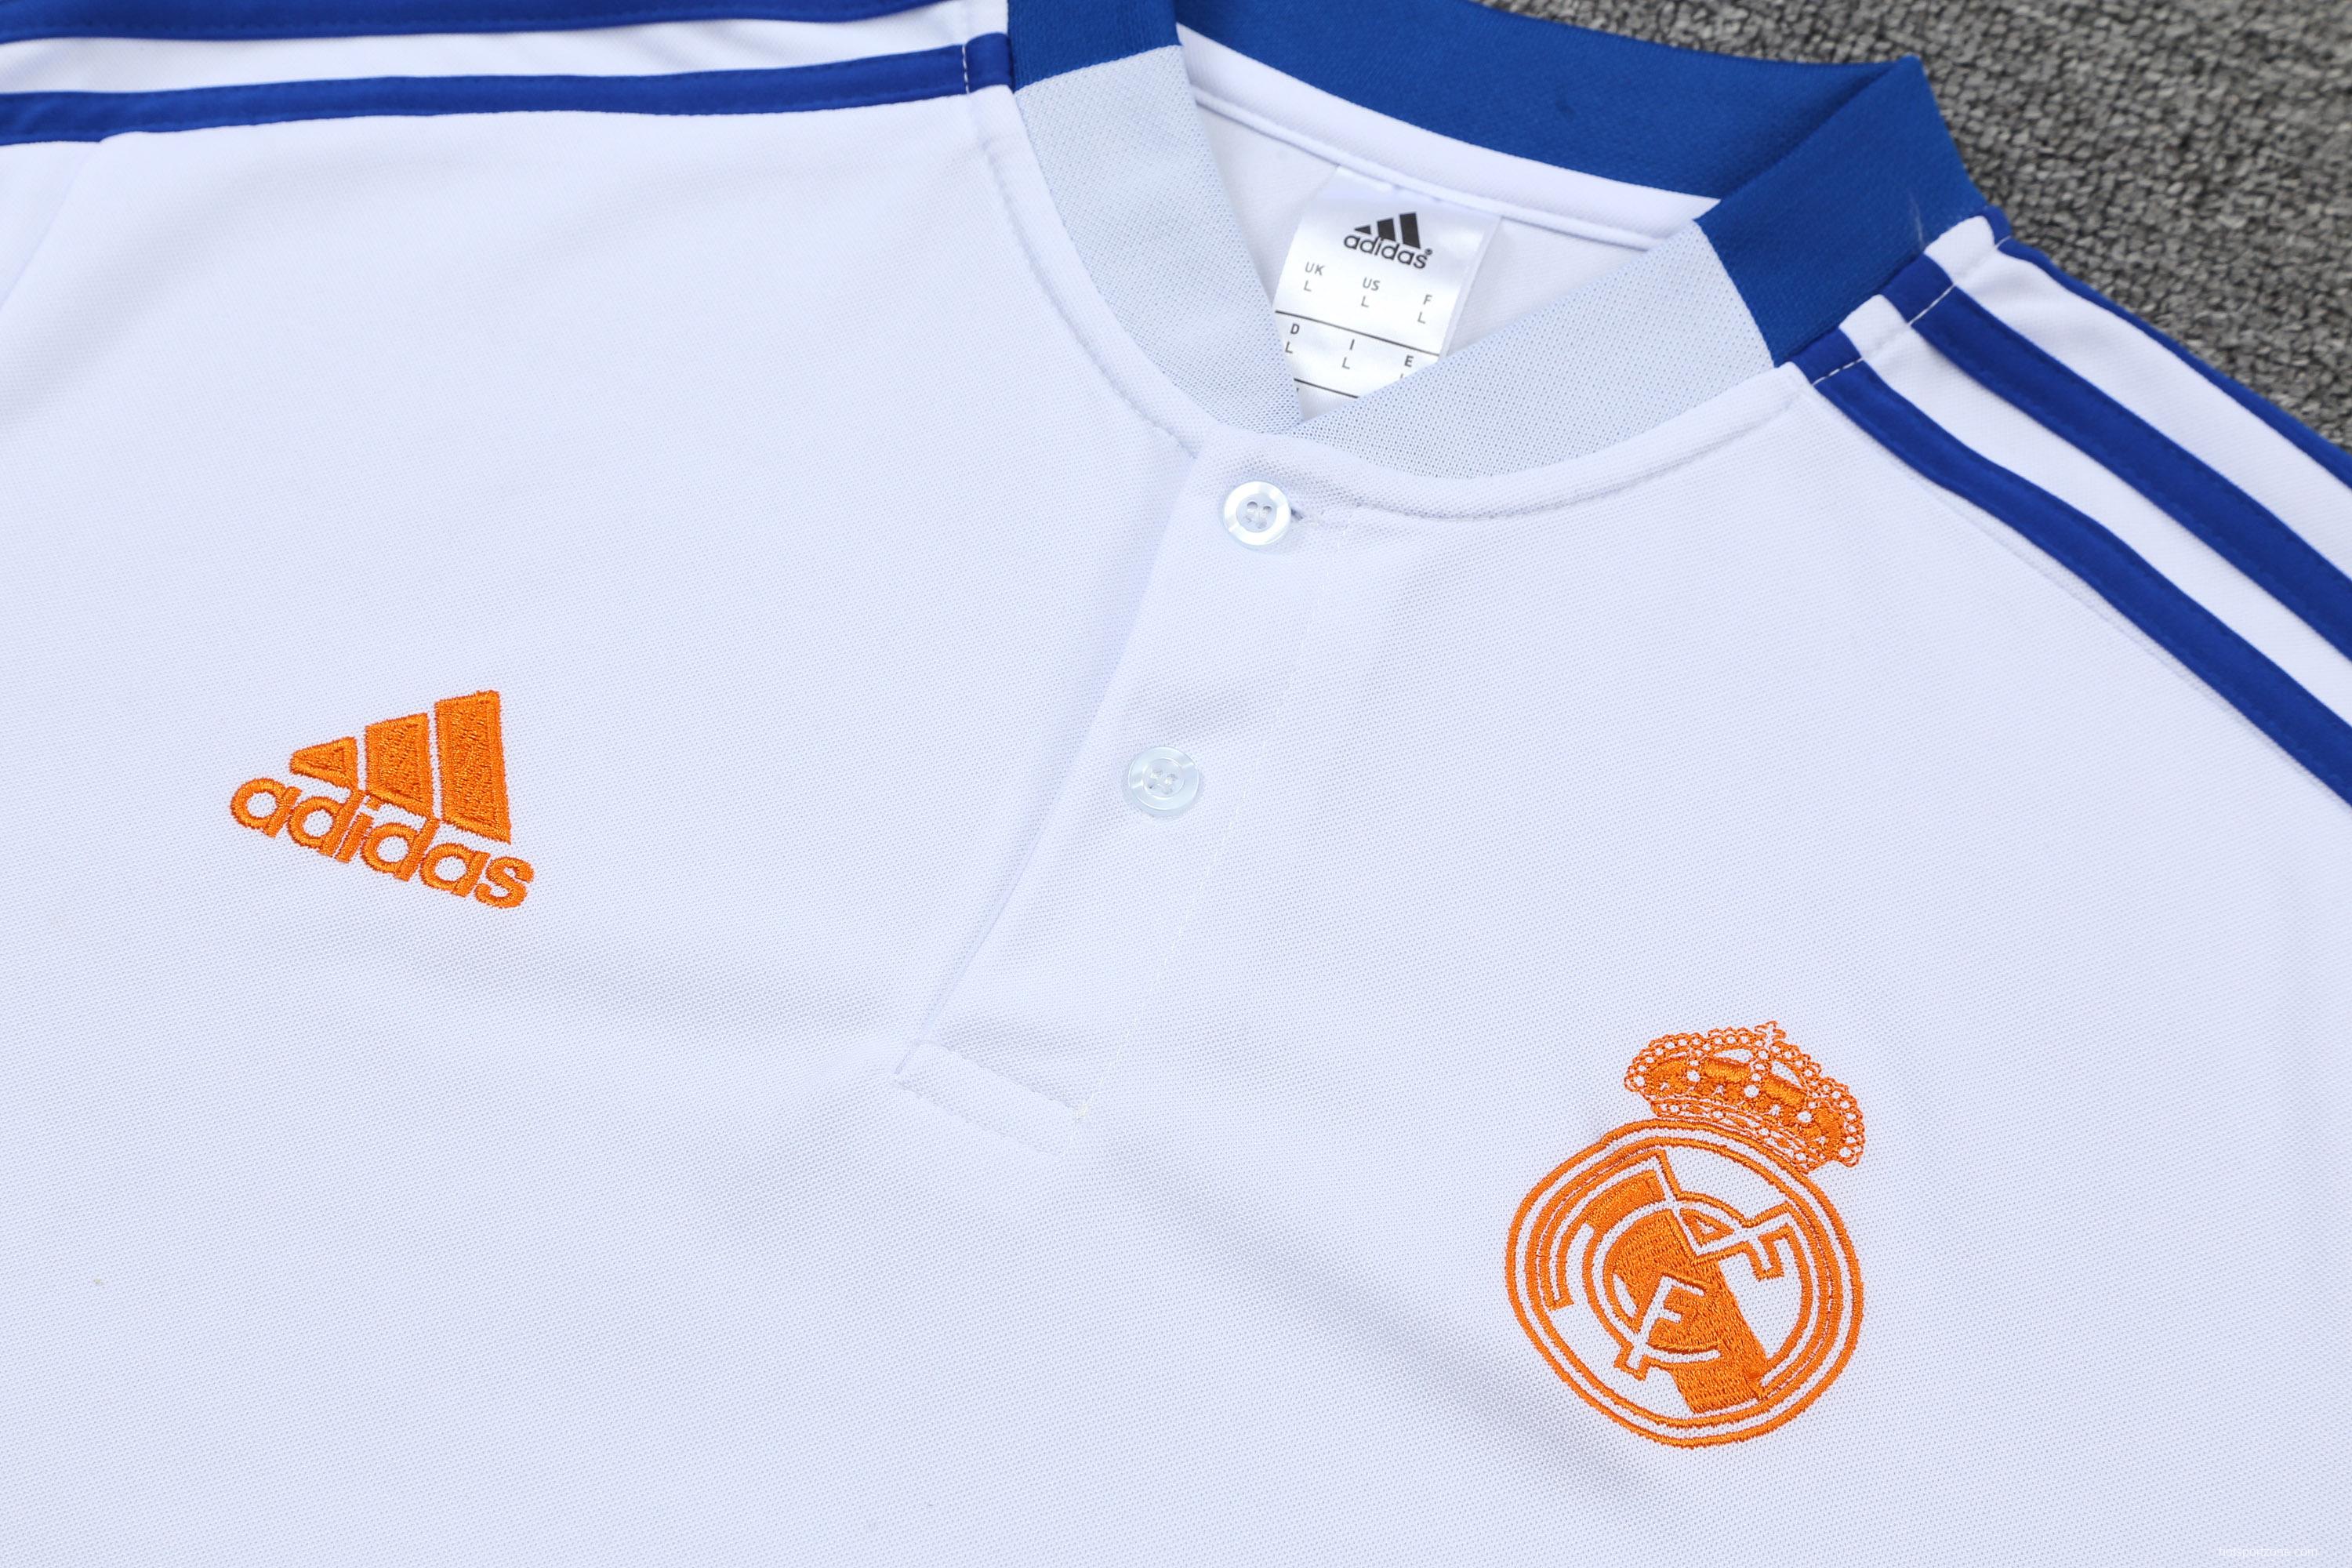 Real Madrid POLO kit White (not supported to be sold separately)